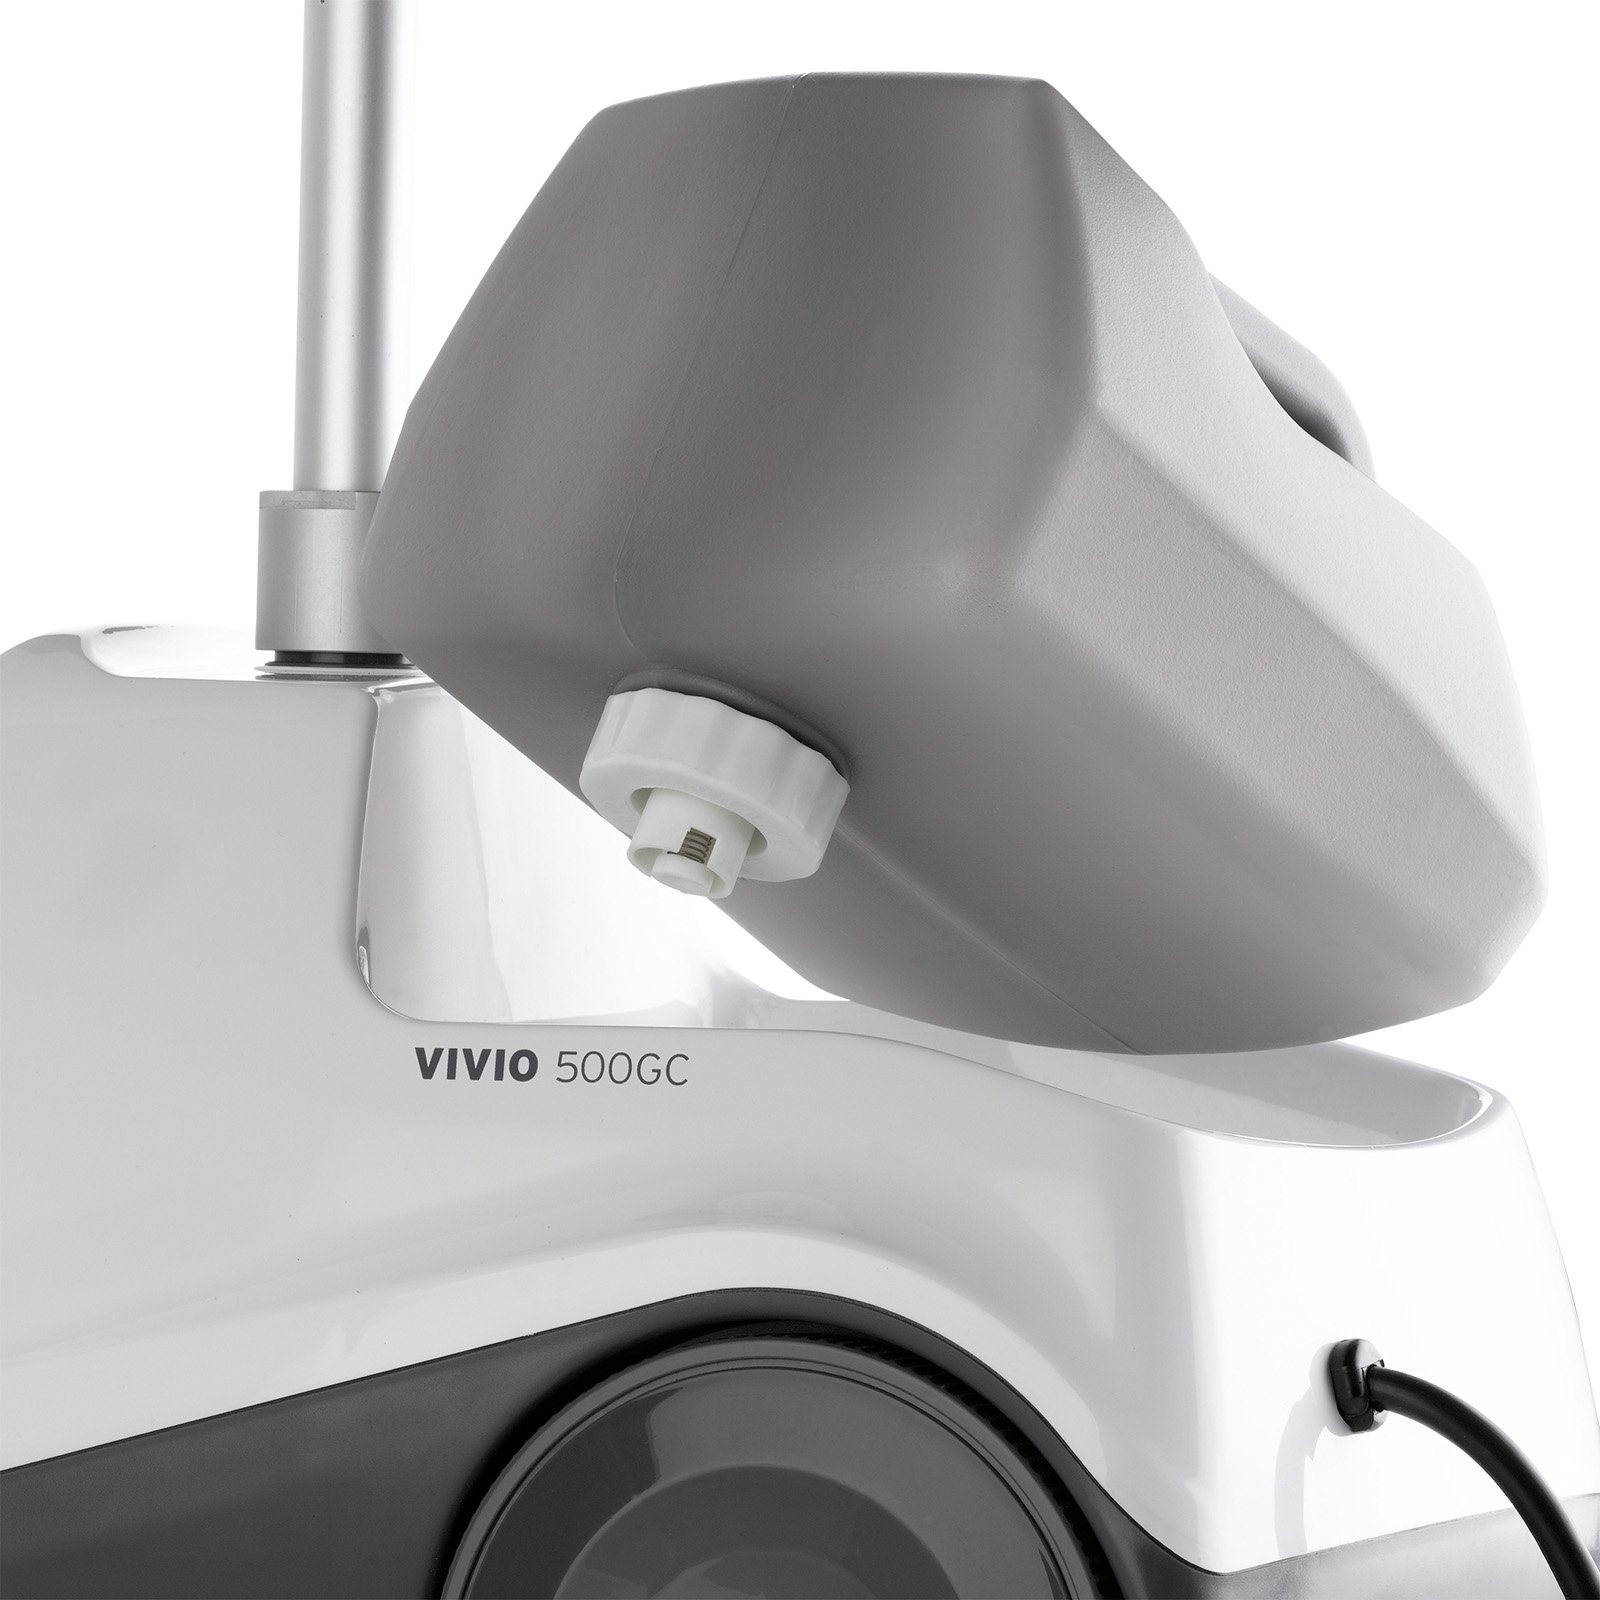 Reliable Vivio Professional Garment Steamer with Heavy-Duty PVC Steam Head, White, 500GC - image 2 of 10